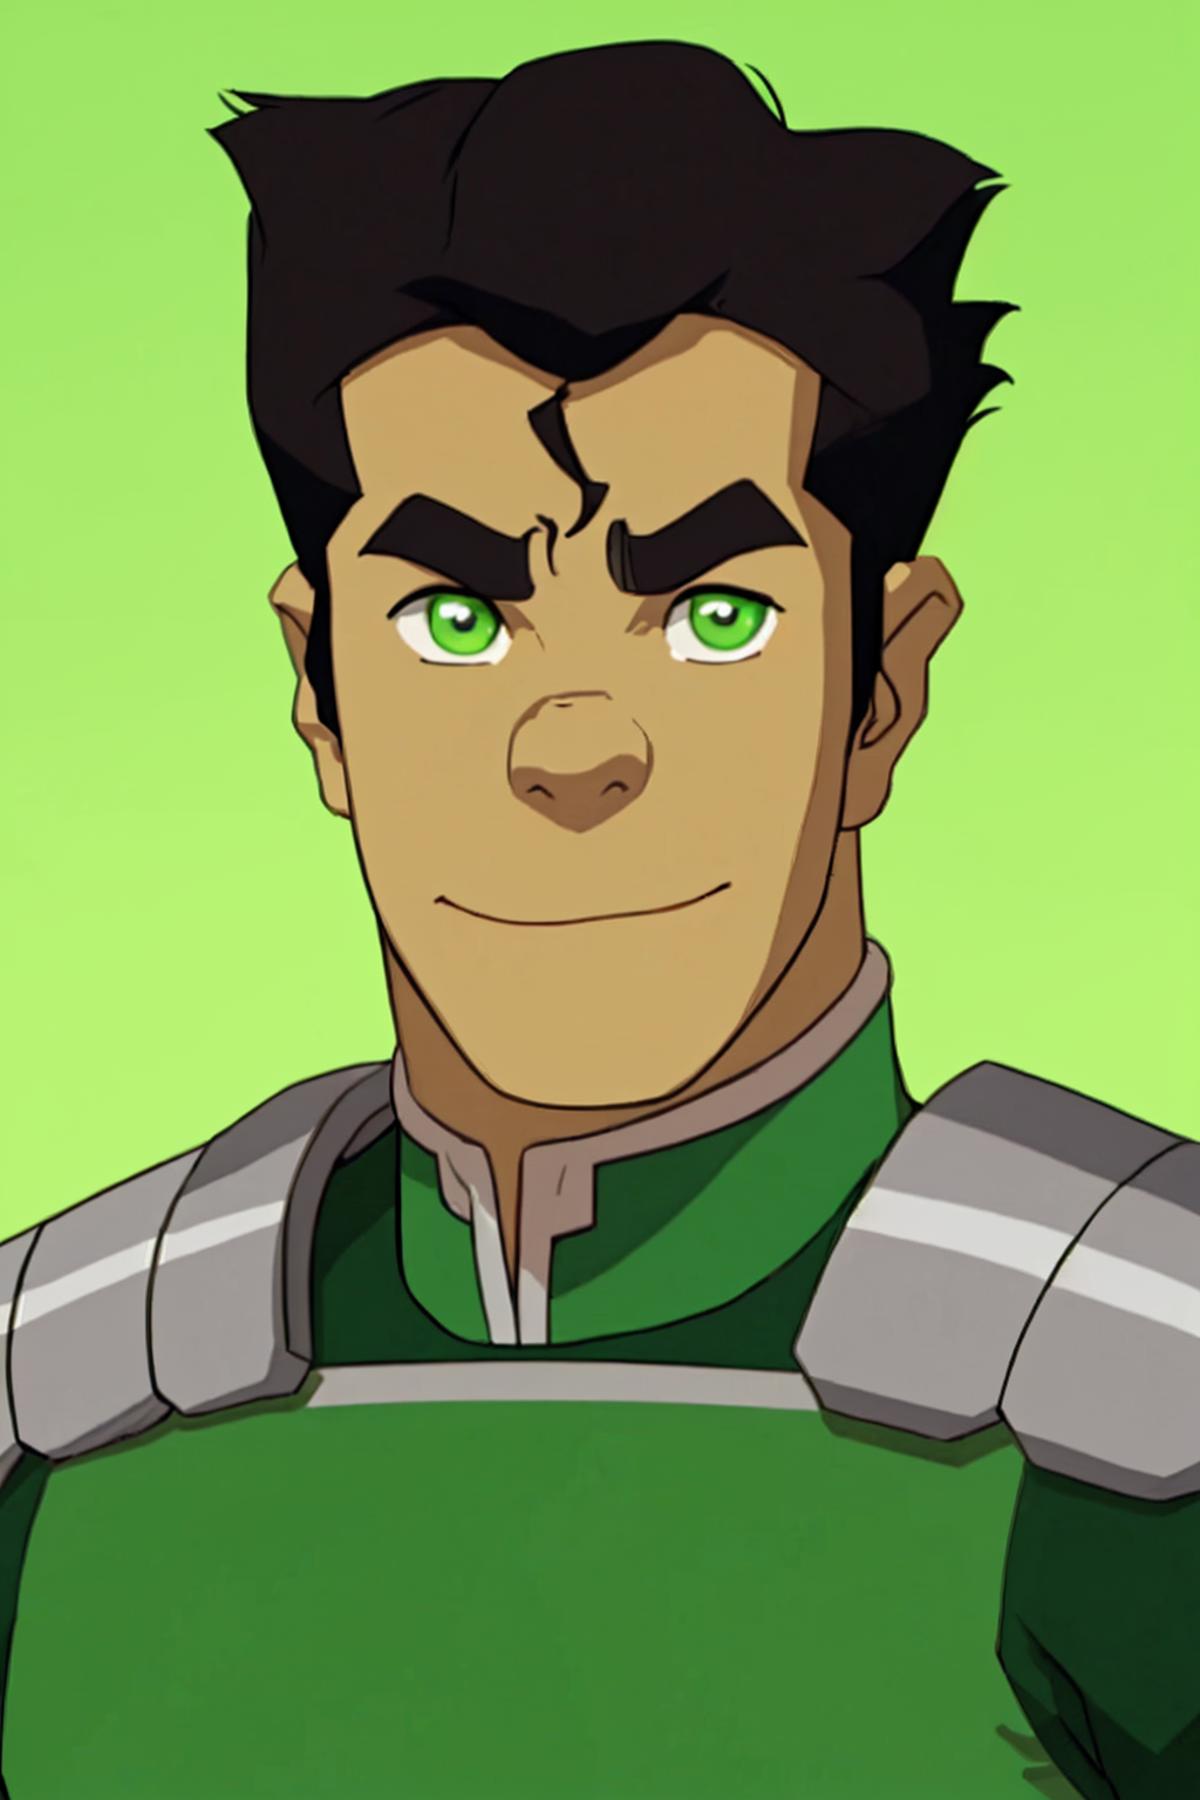 Bolin (The Legend of Korra) image by diffusiondudes